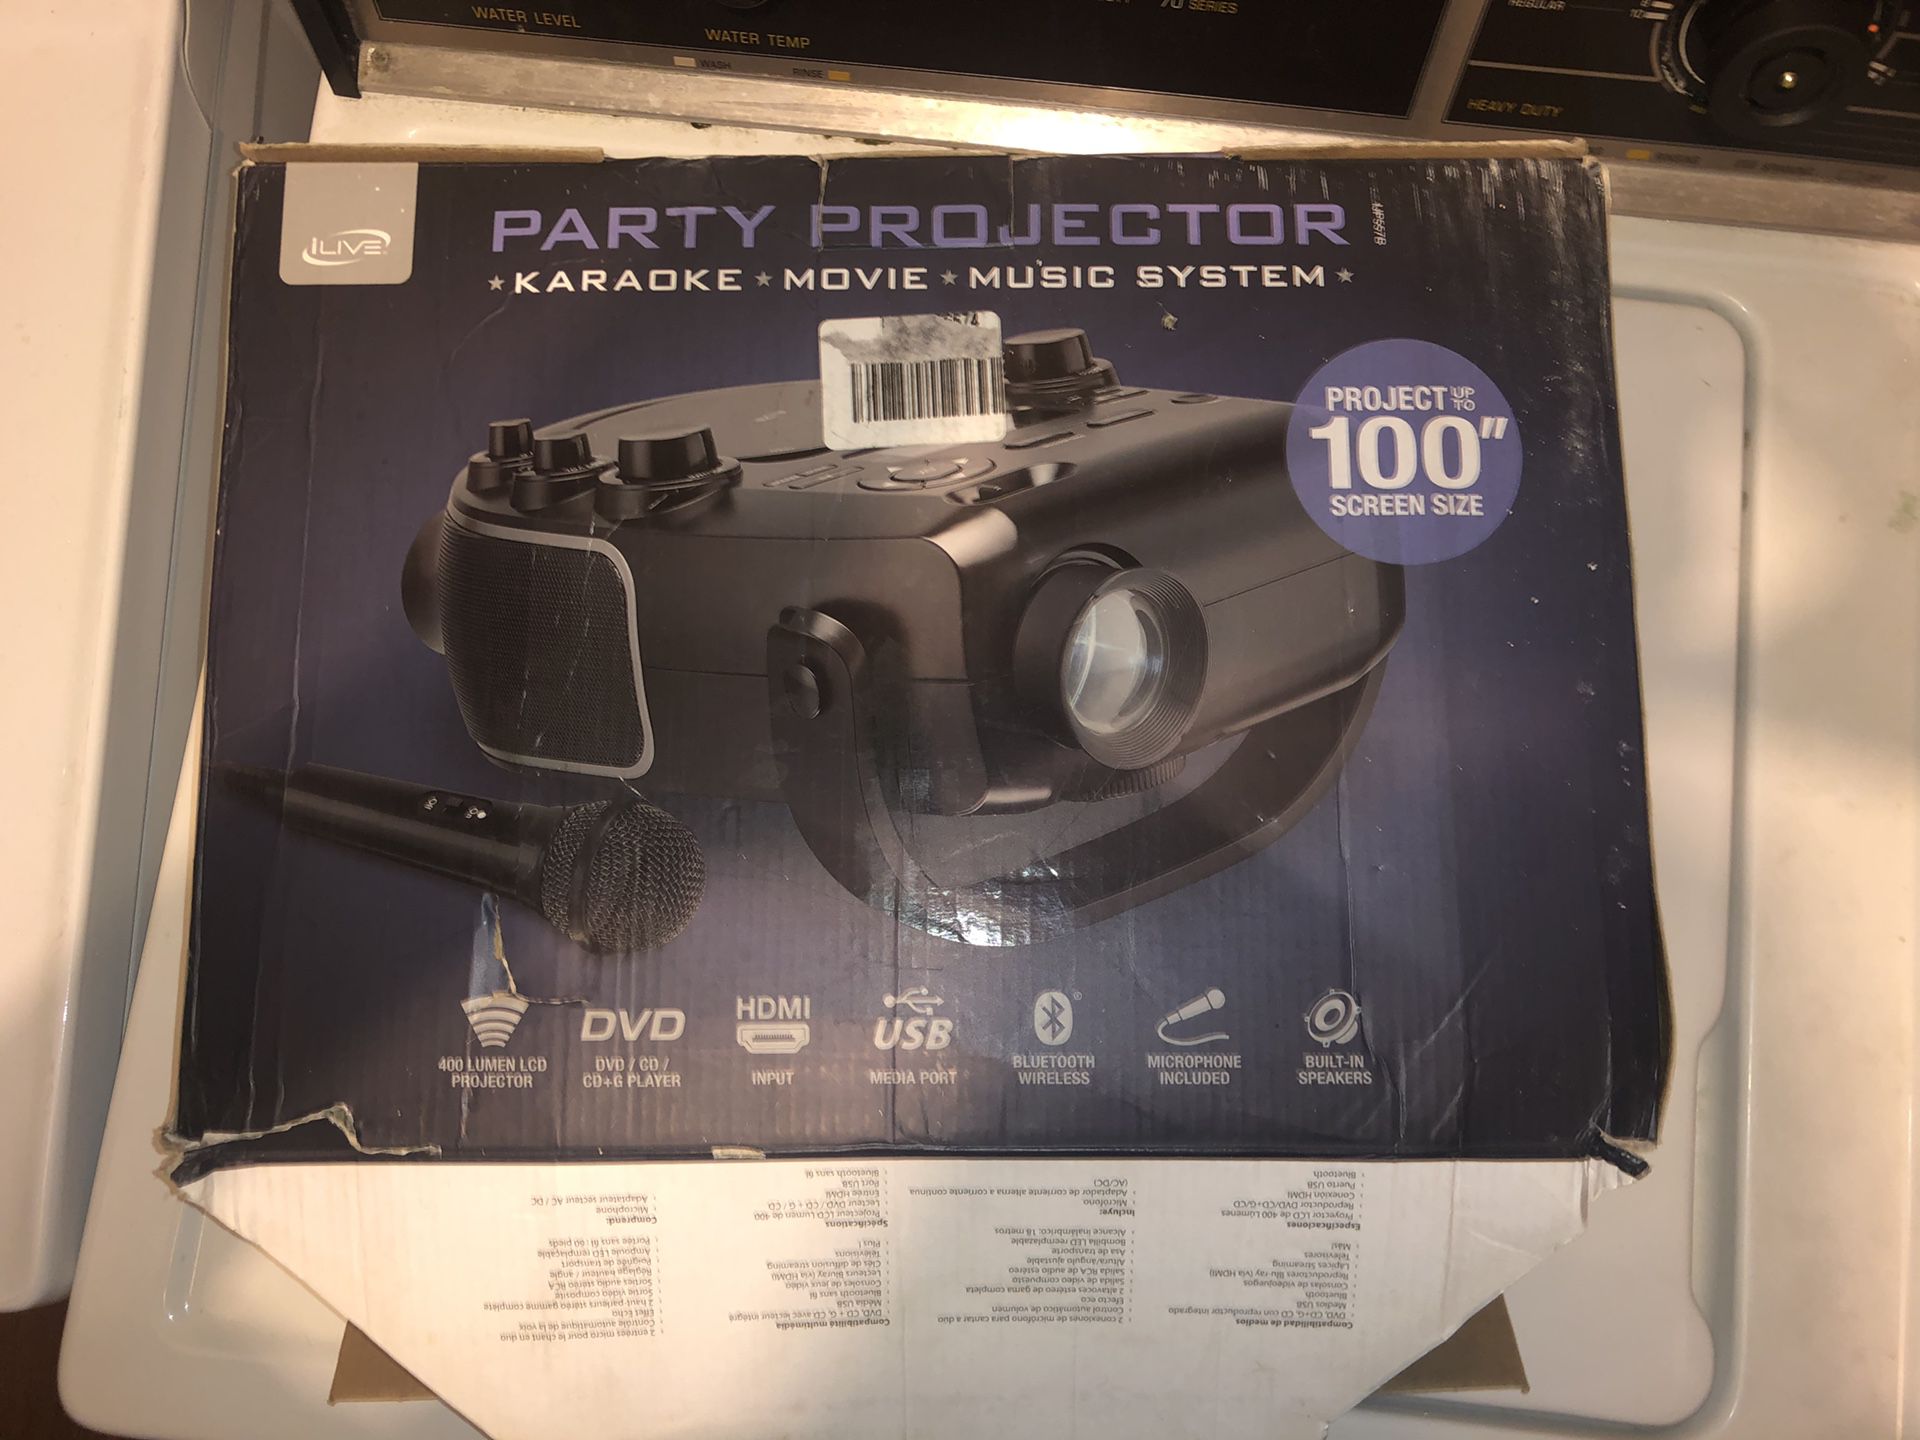 Party projector